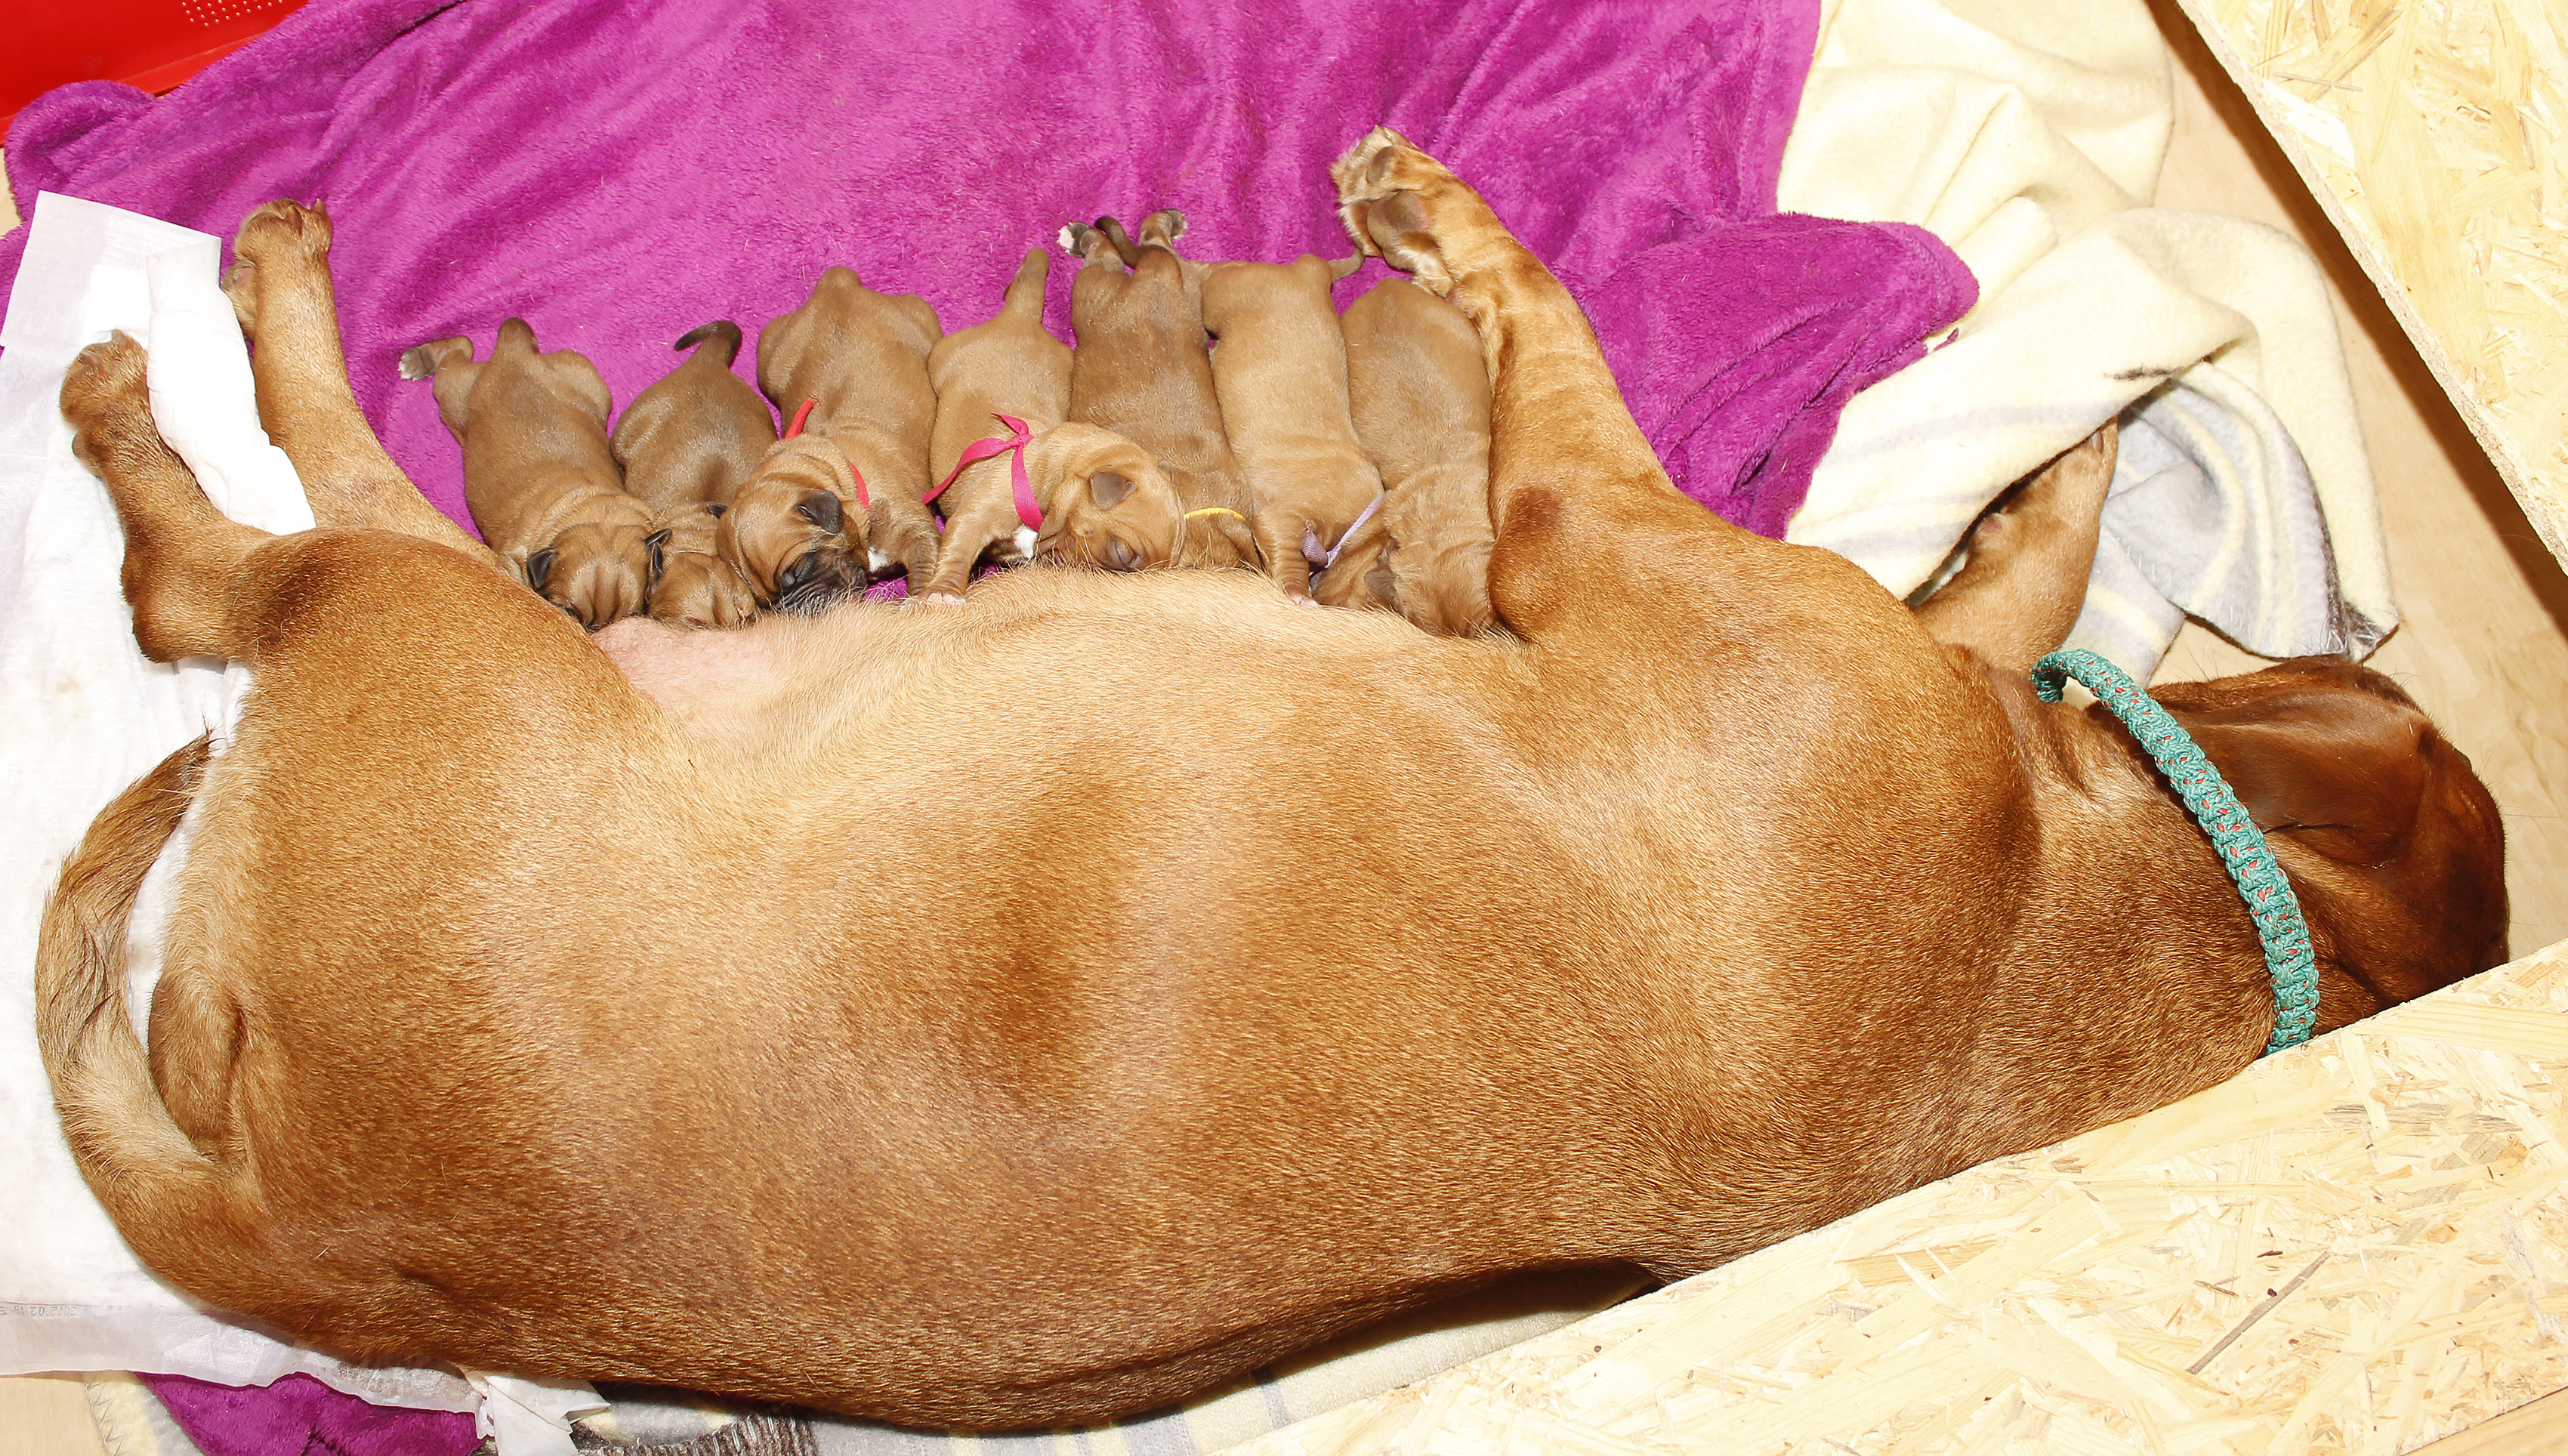 What should I do if my dog gives birth to puppies?